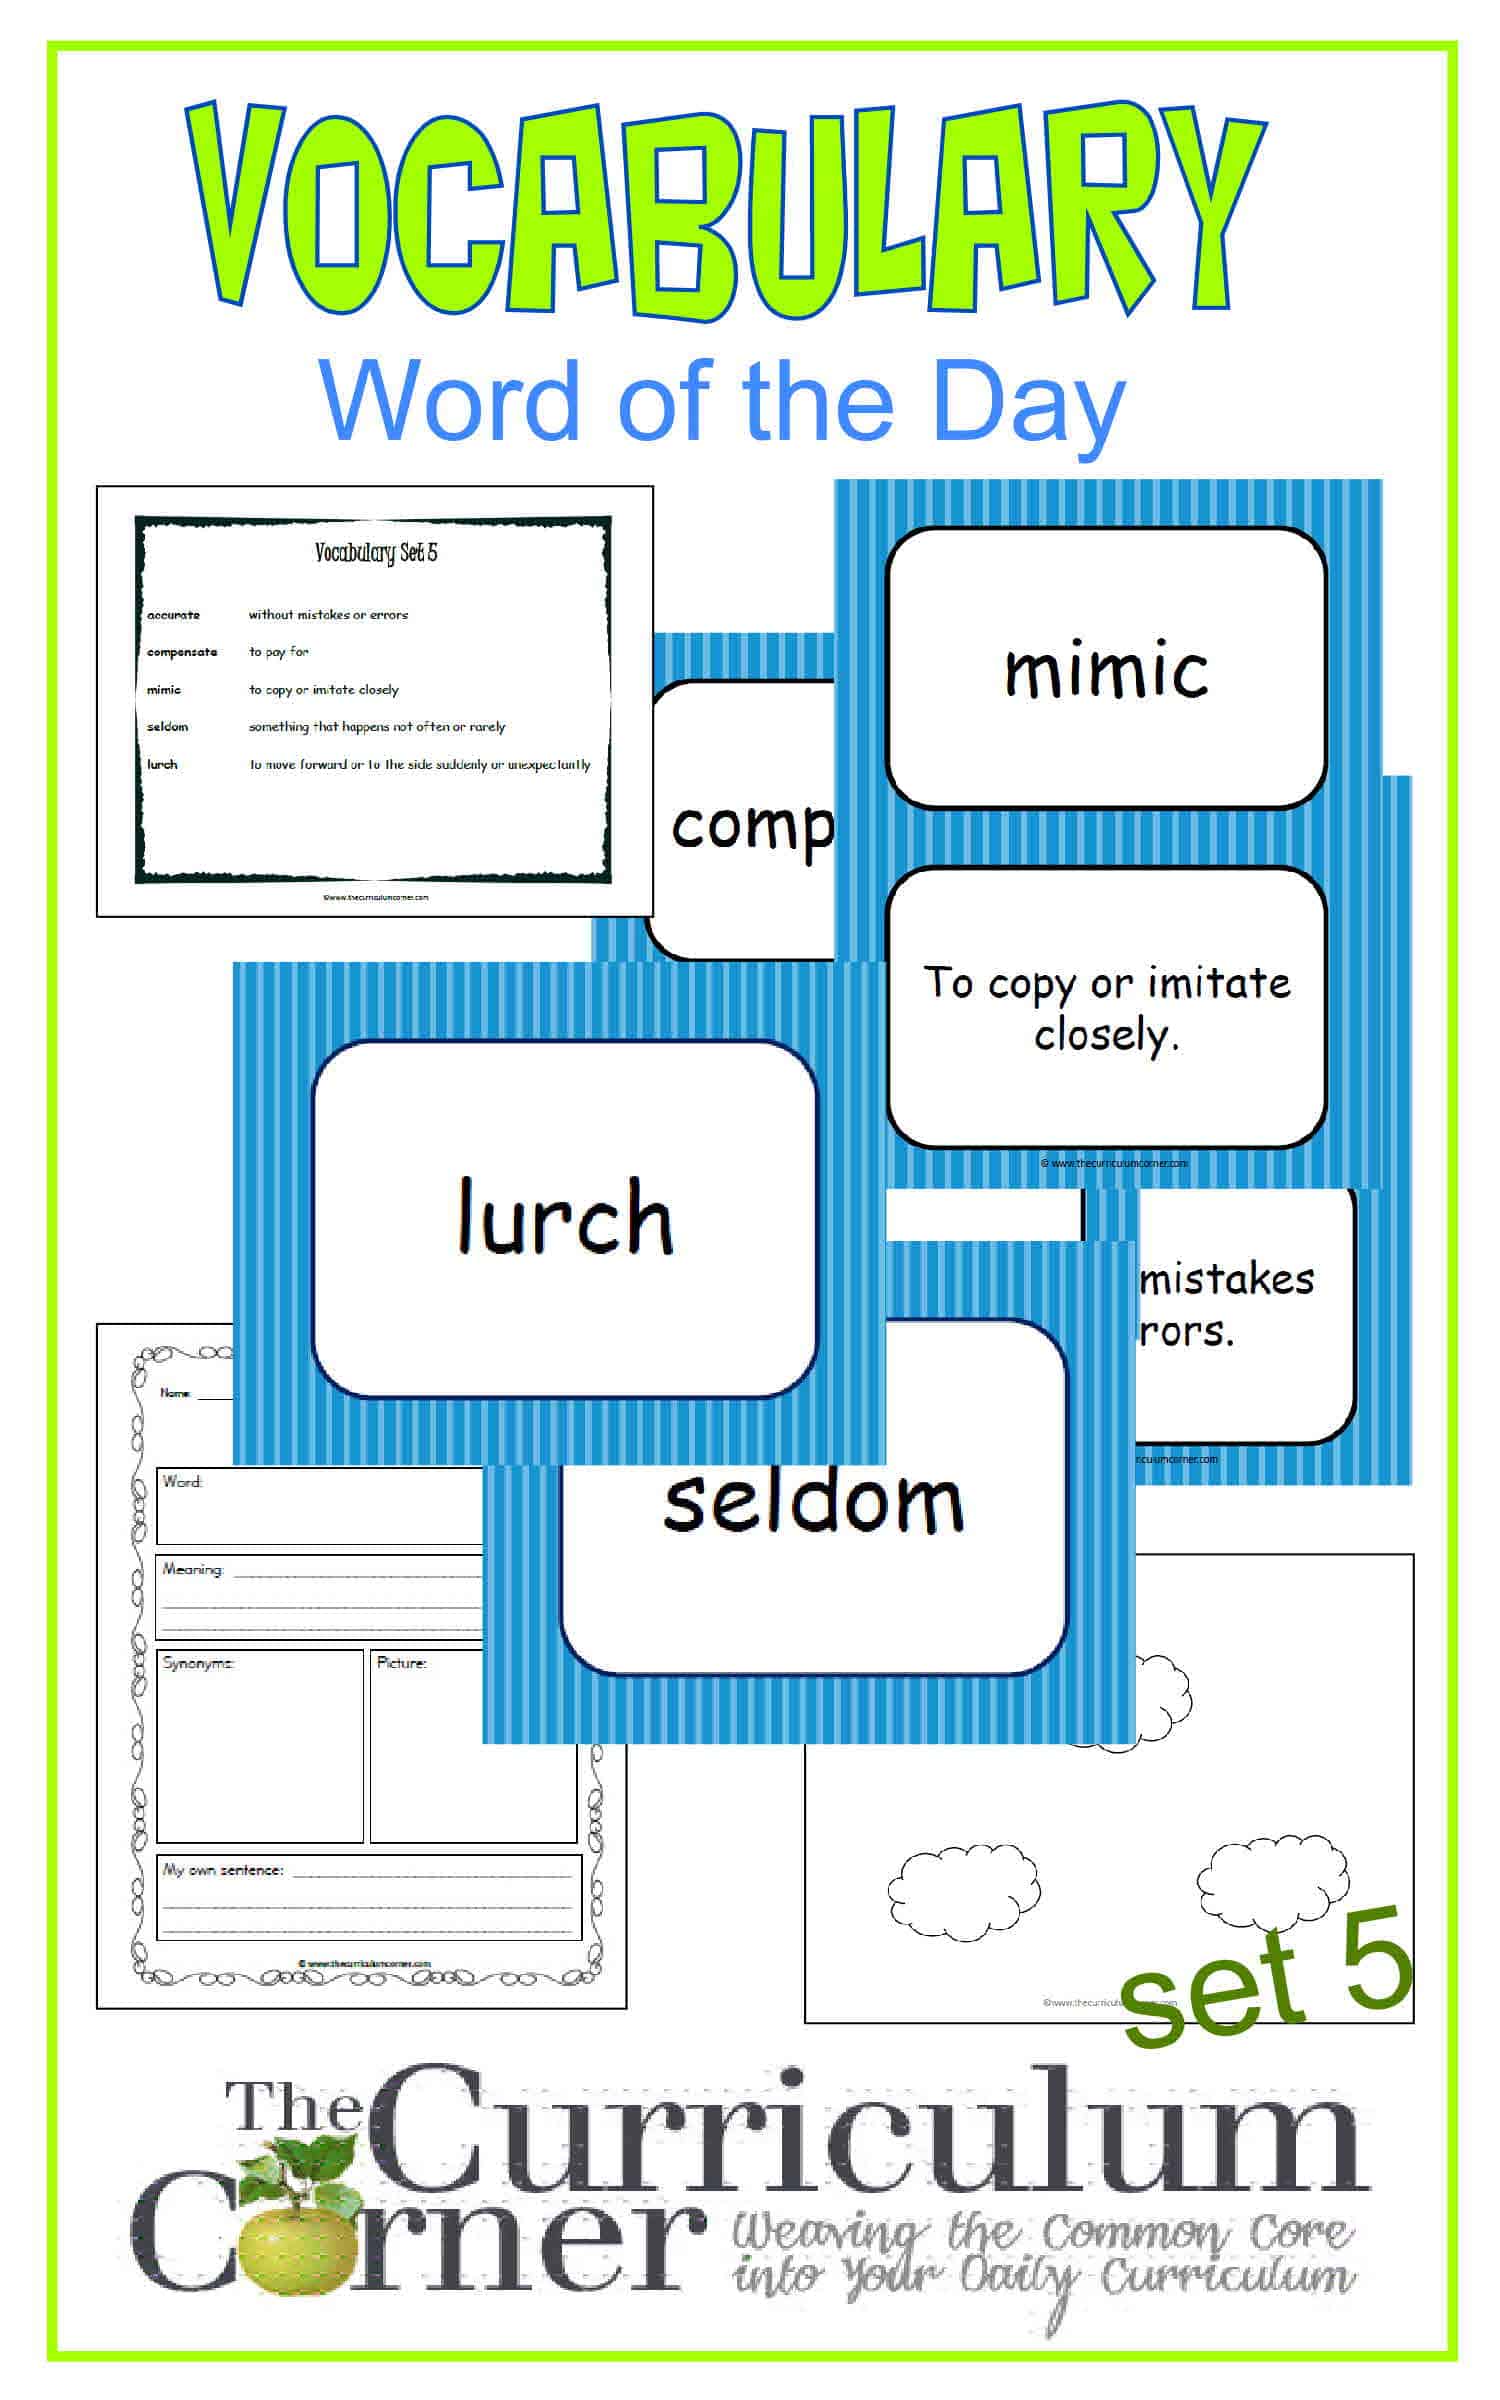 vocabulary-word-of-the-day-set-5-the-curriculum-corner-4-5-6